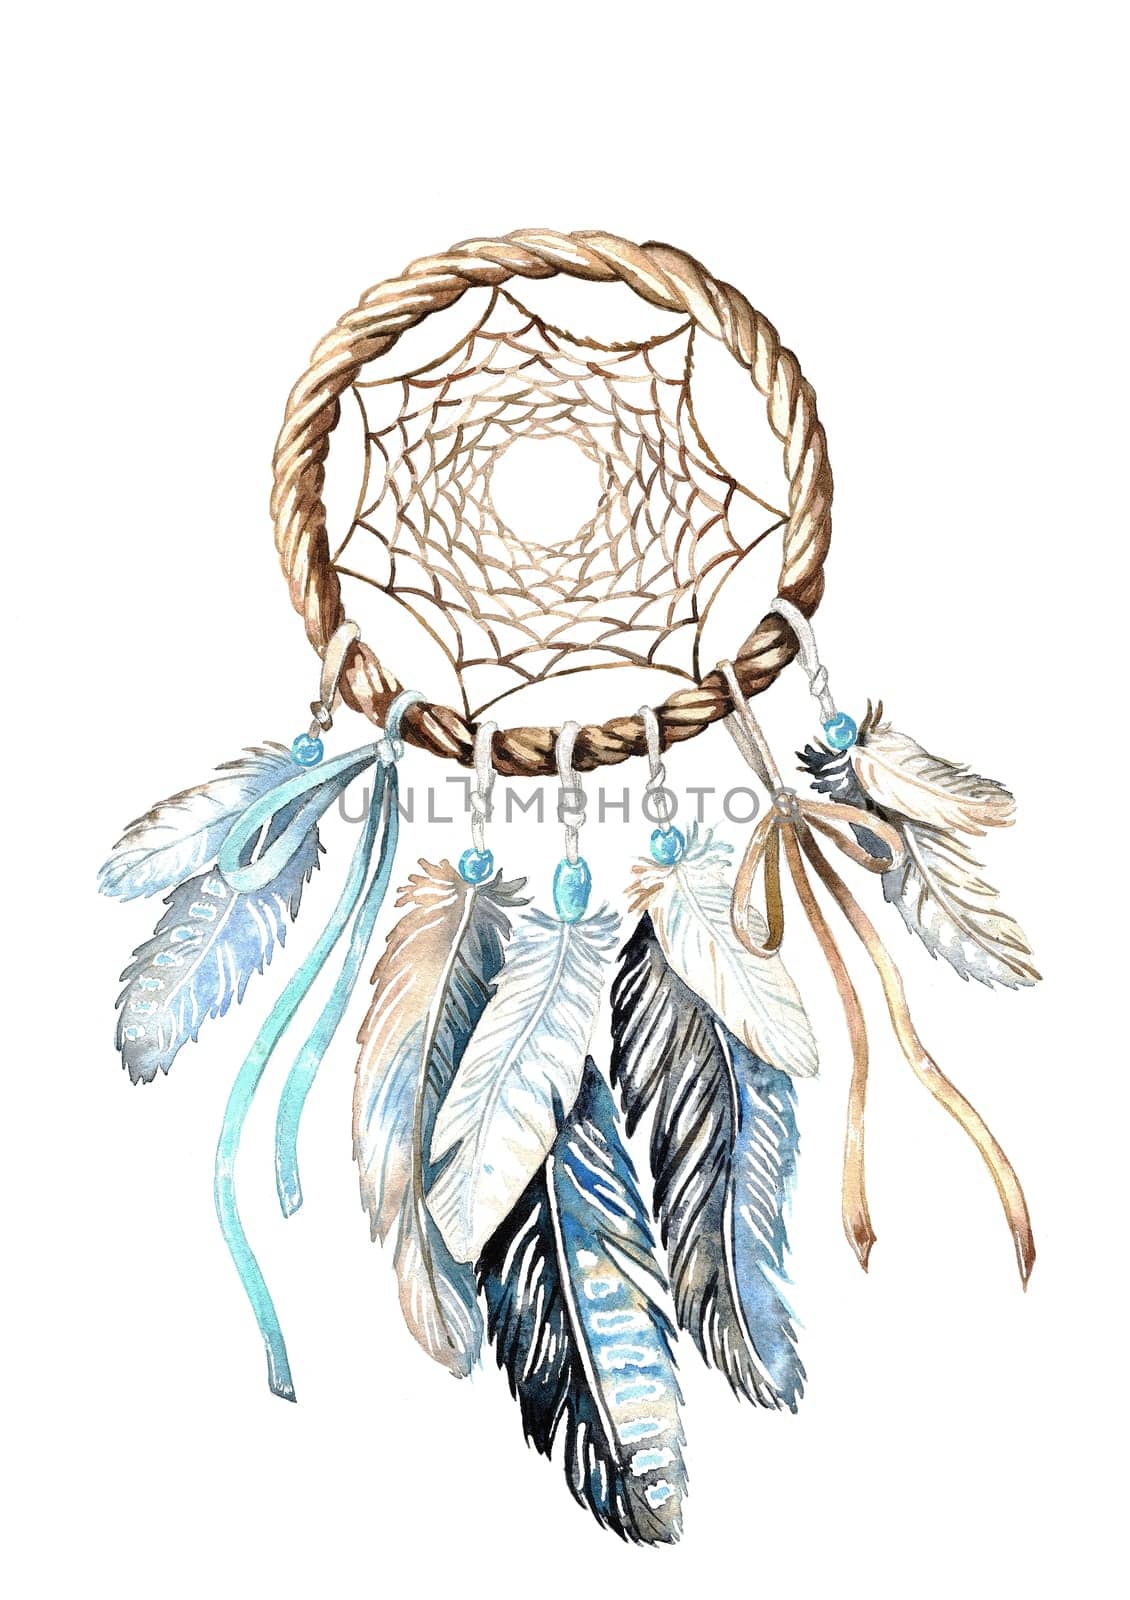 Dreamcatcher, feathers and beads. Native traditional symbol.